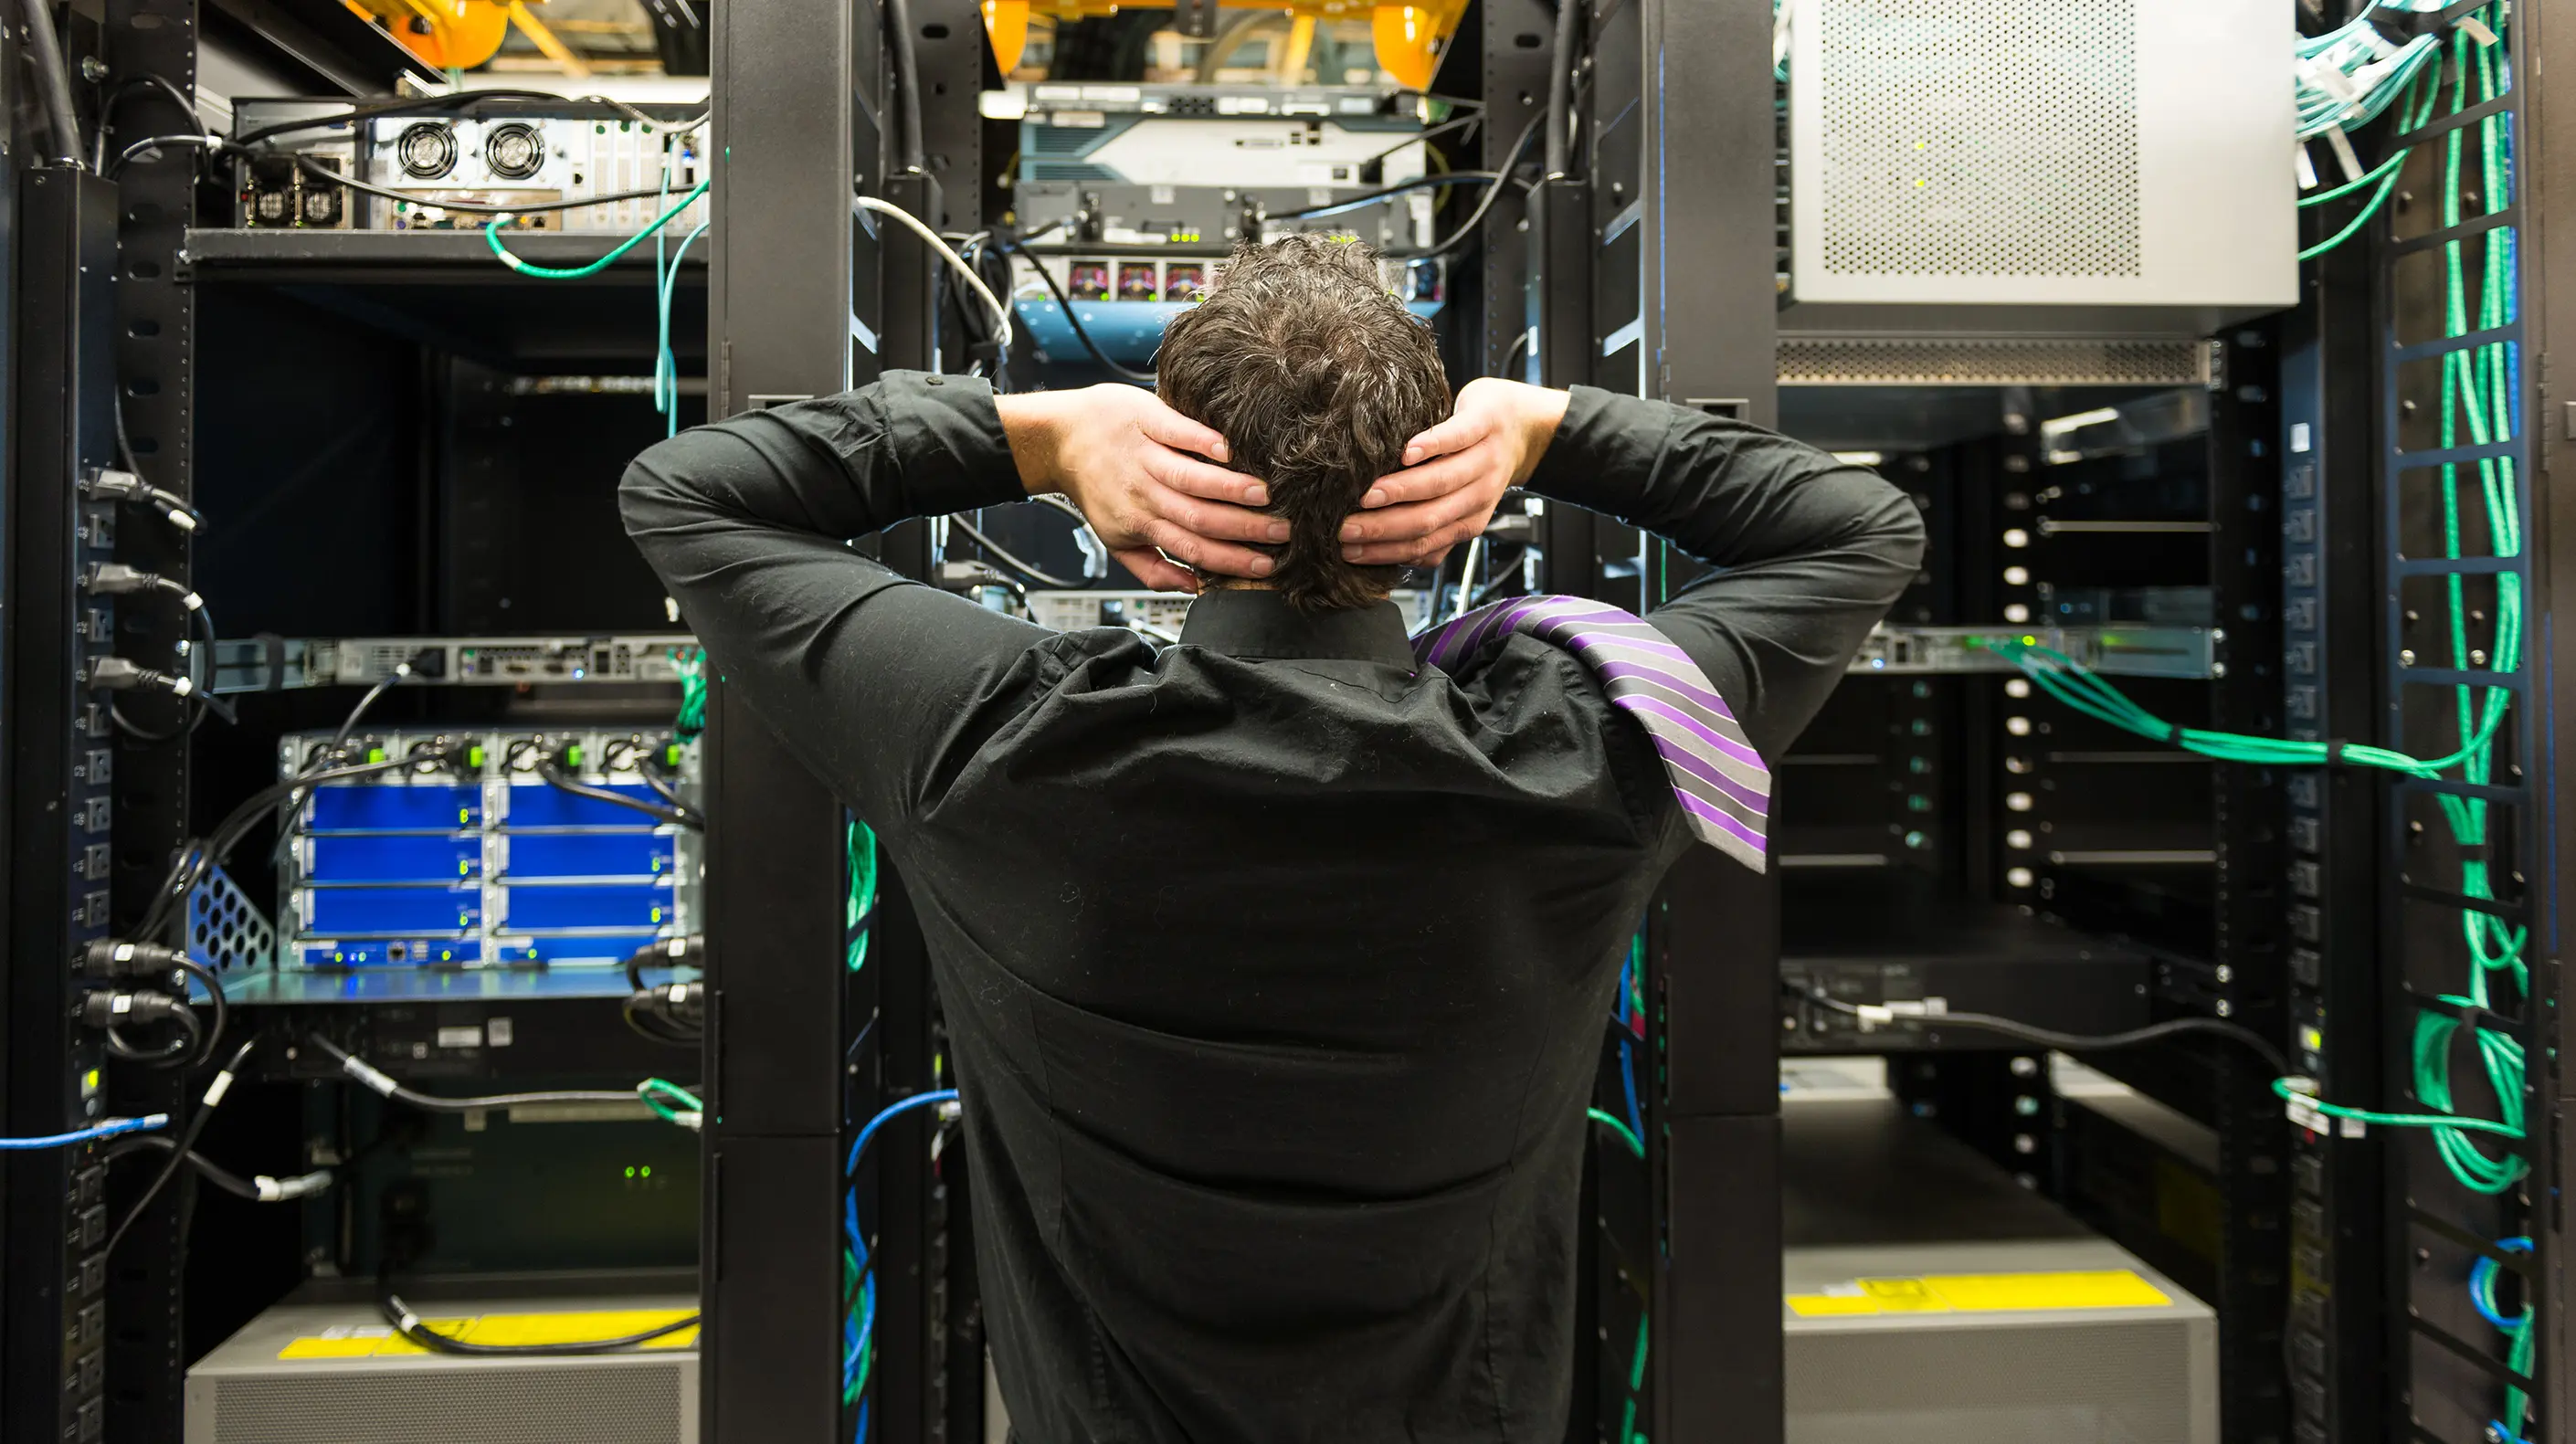 A stressed worker looking into a server room trying to figure out why there was a network failure.